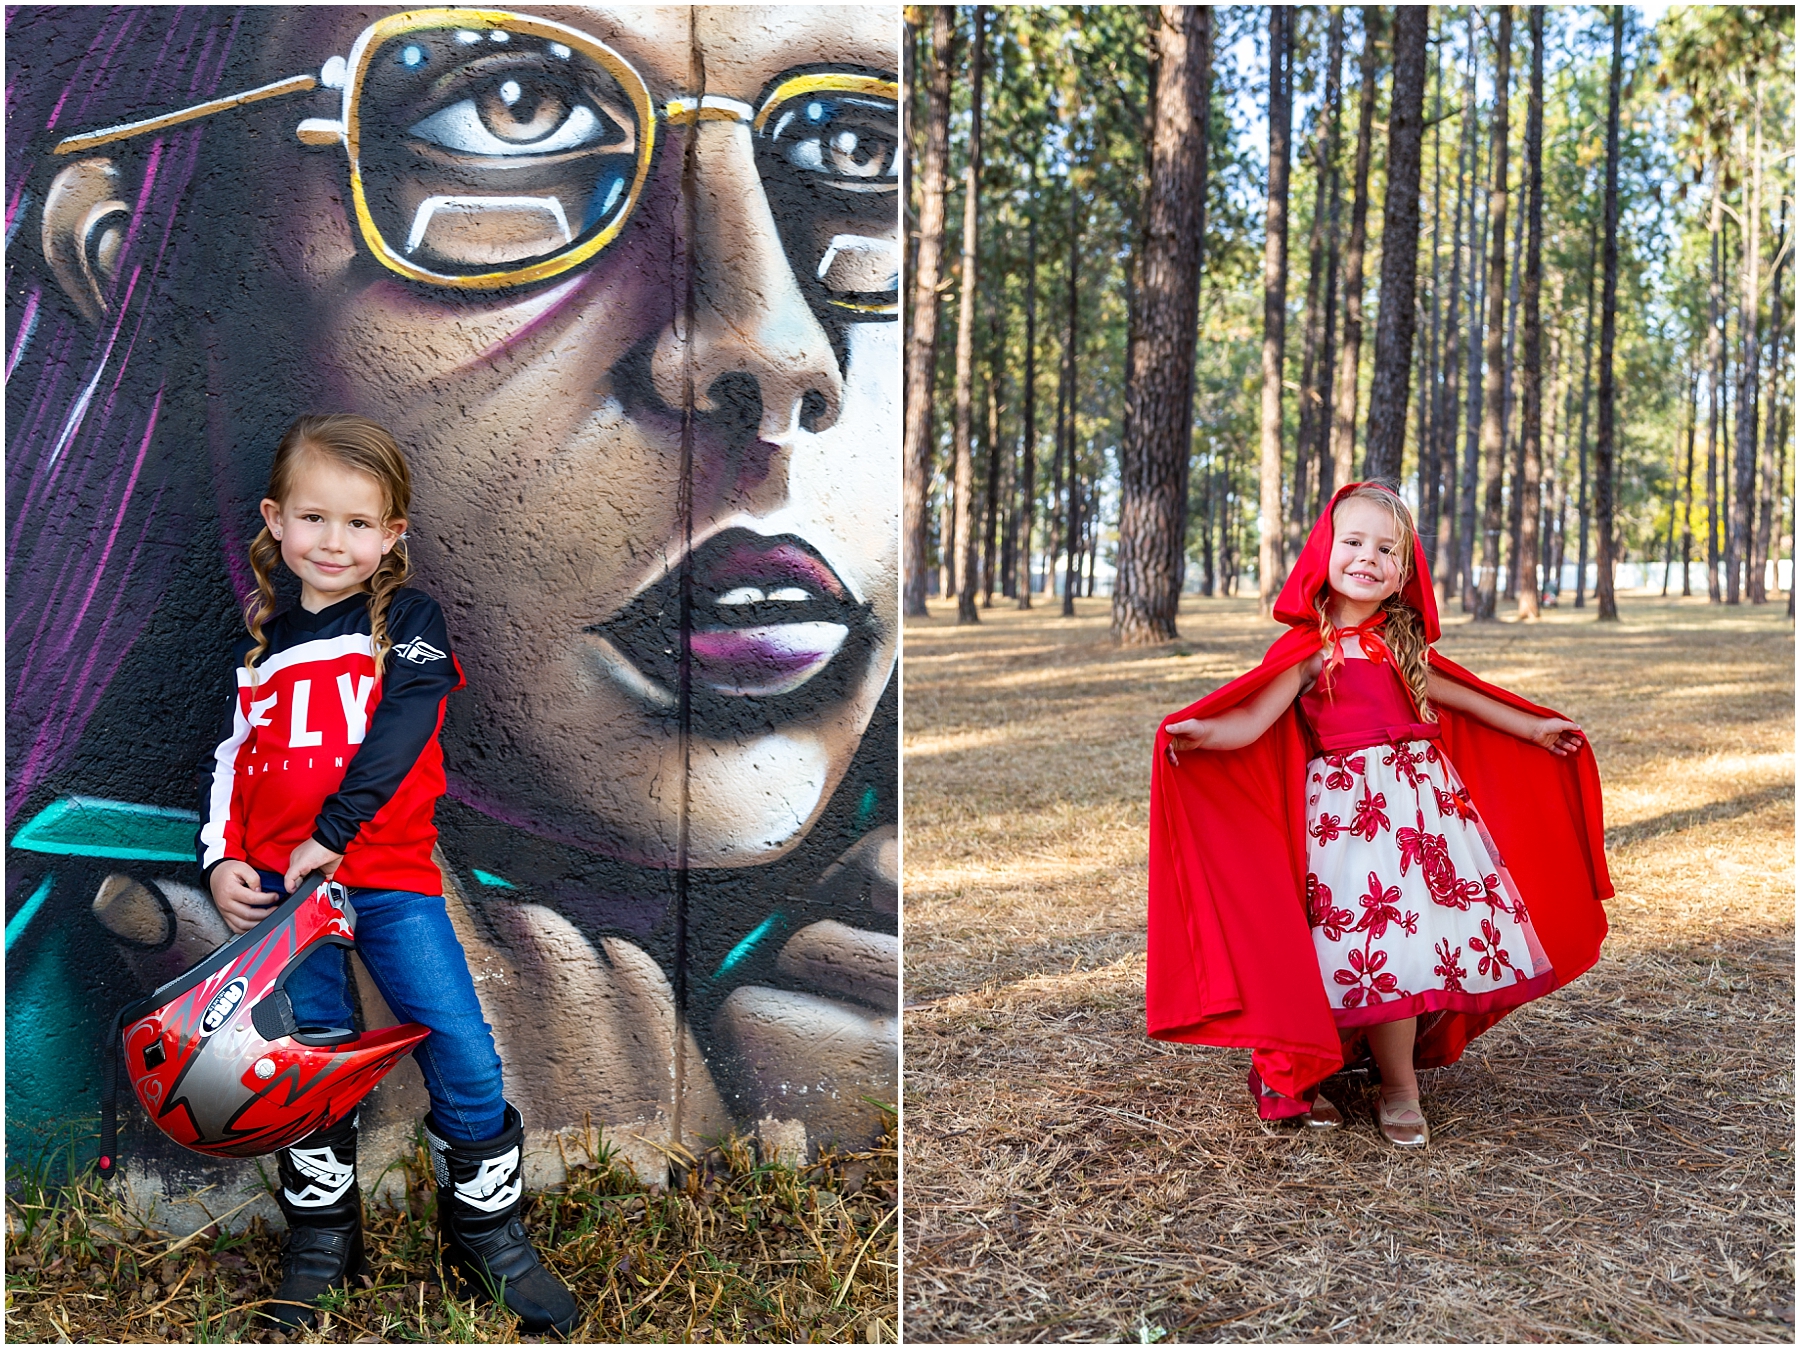 Mikayla – from biker girl to little red riding hood